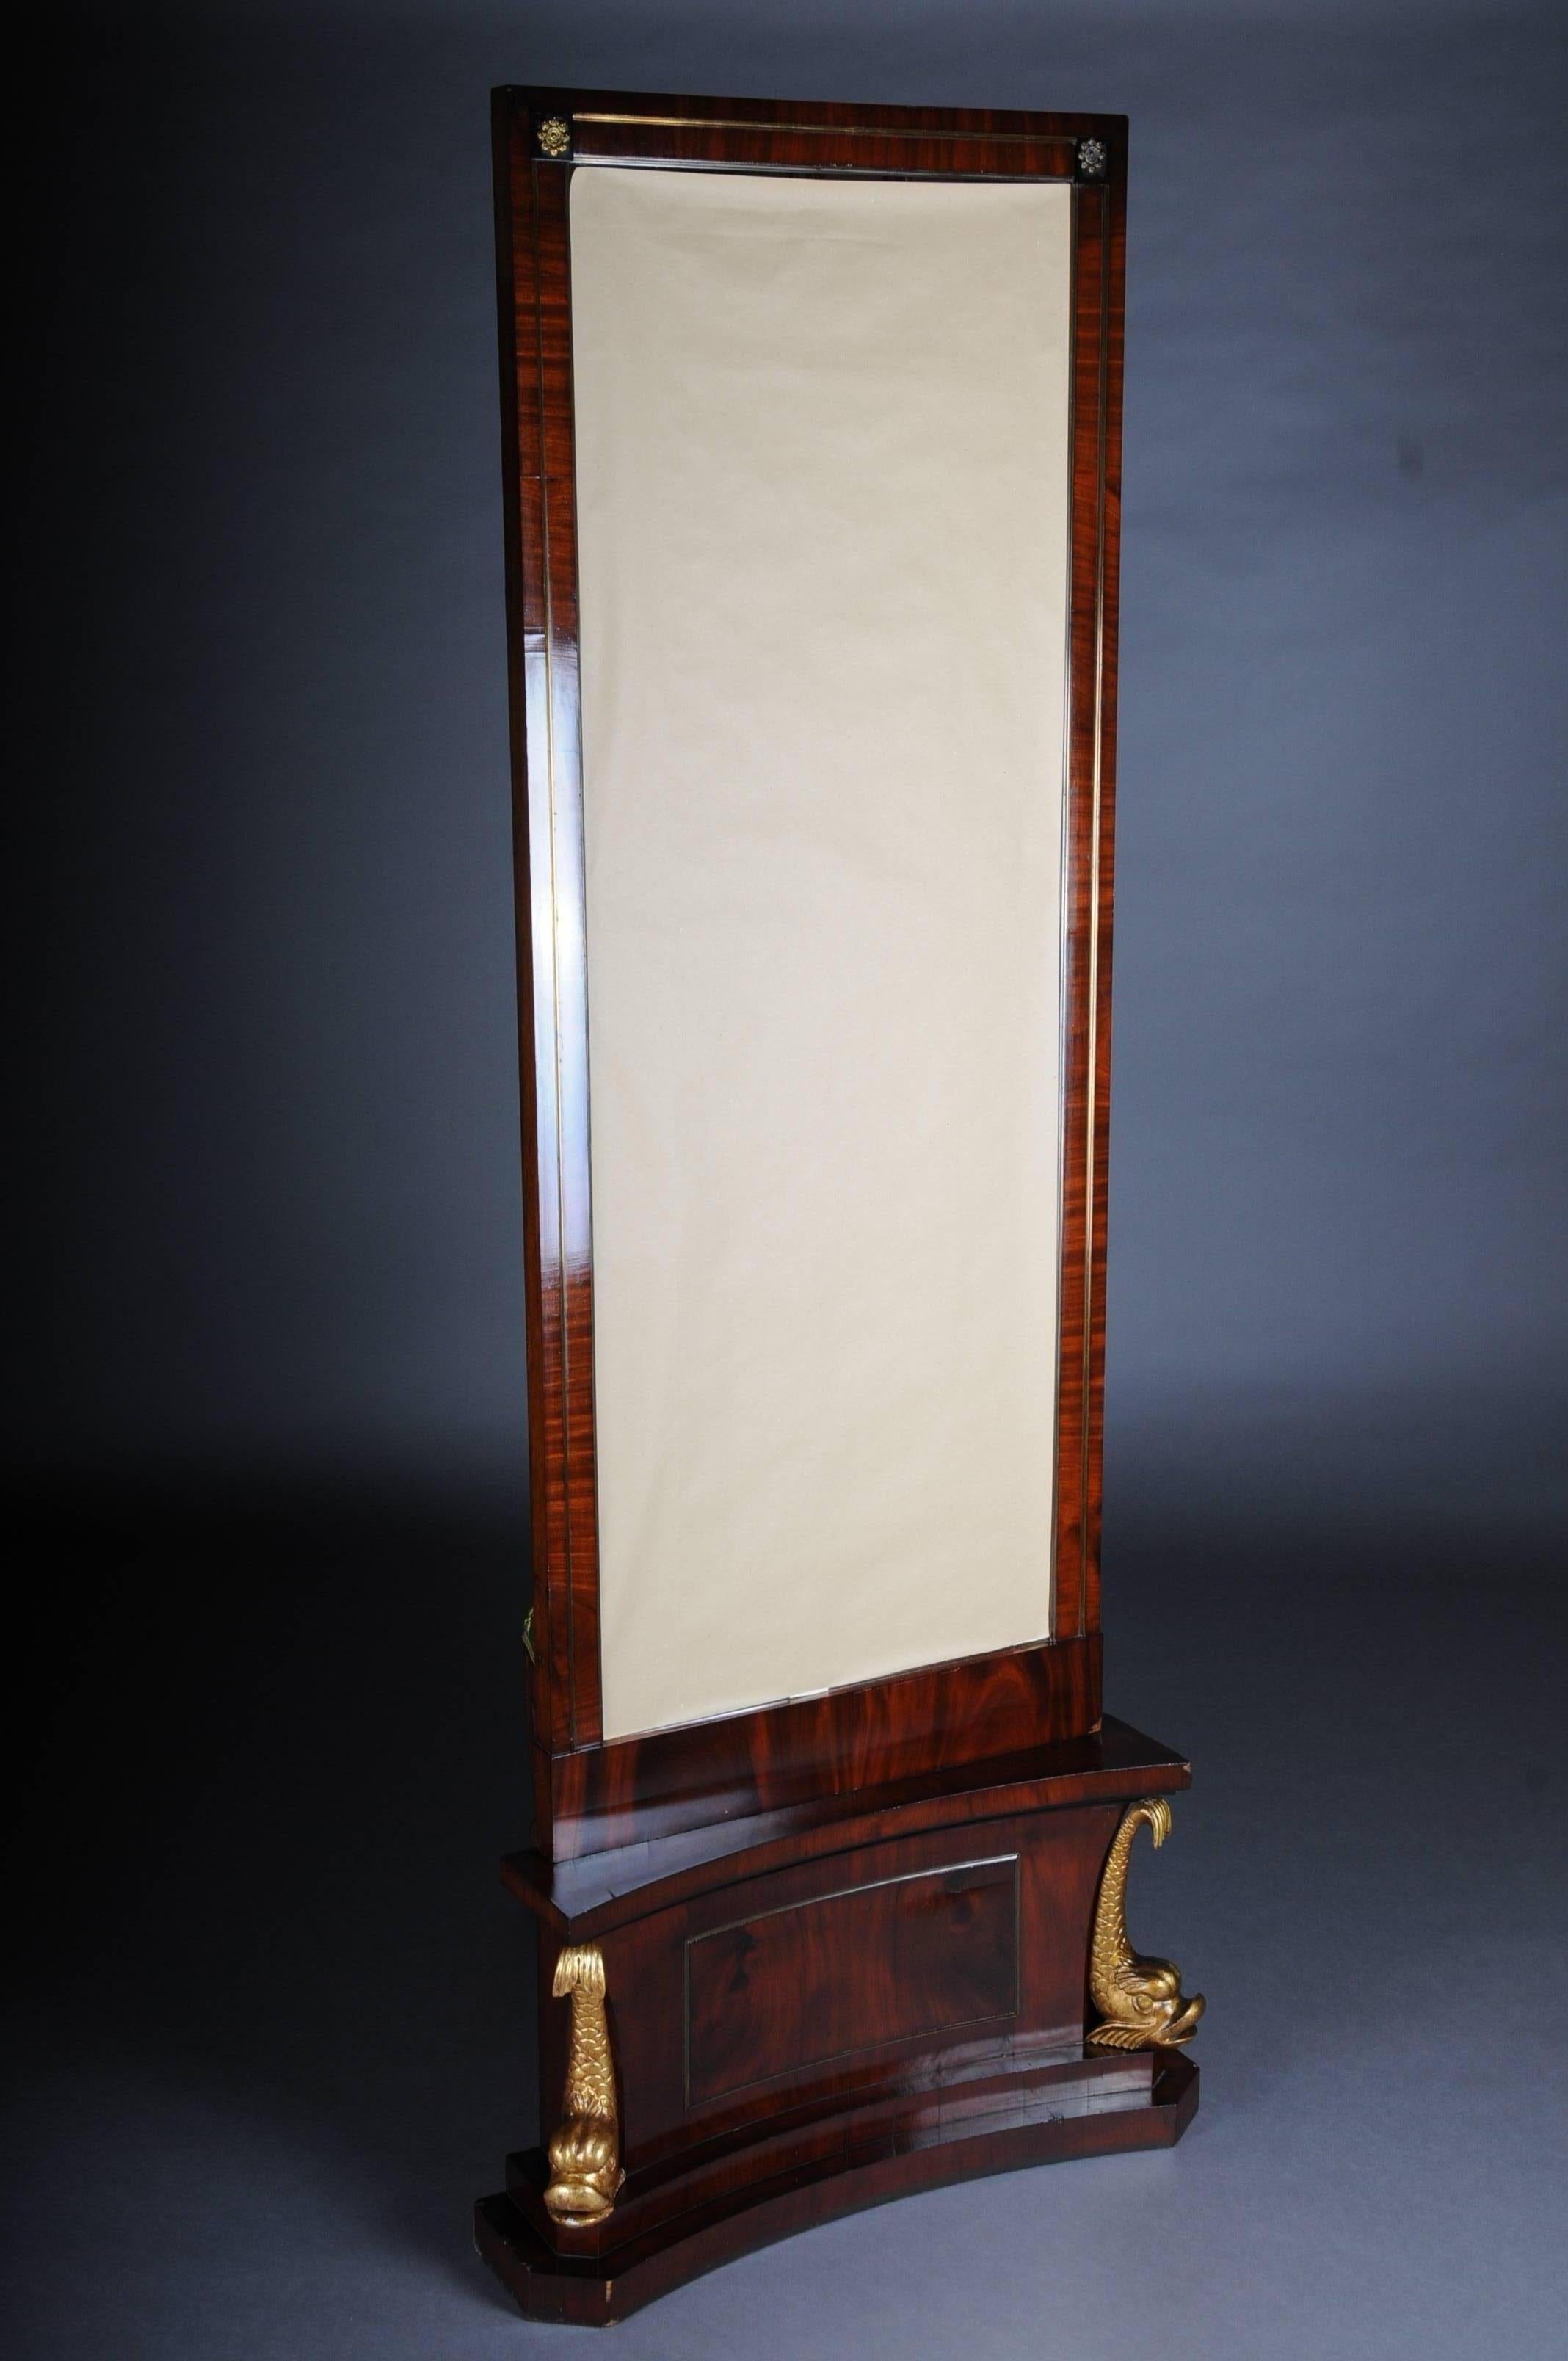 Mahogany, brass moldings. Carved and Poliement gilded dolphins. Original old mirror glass.


(M-34).